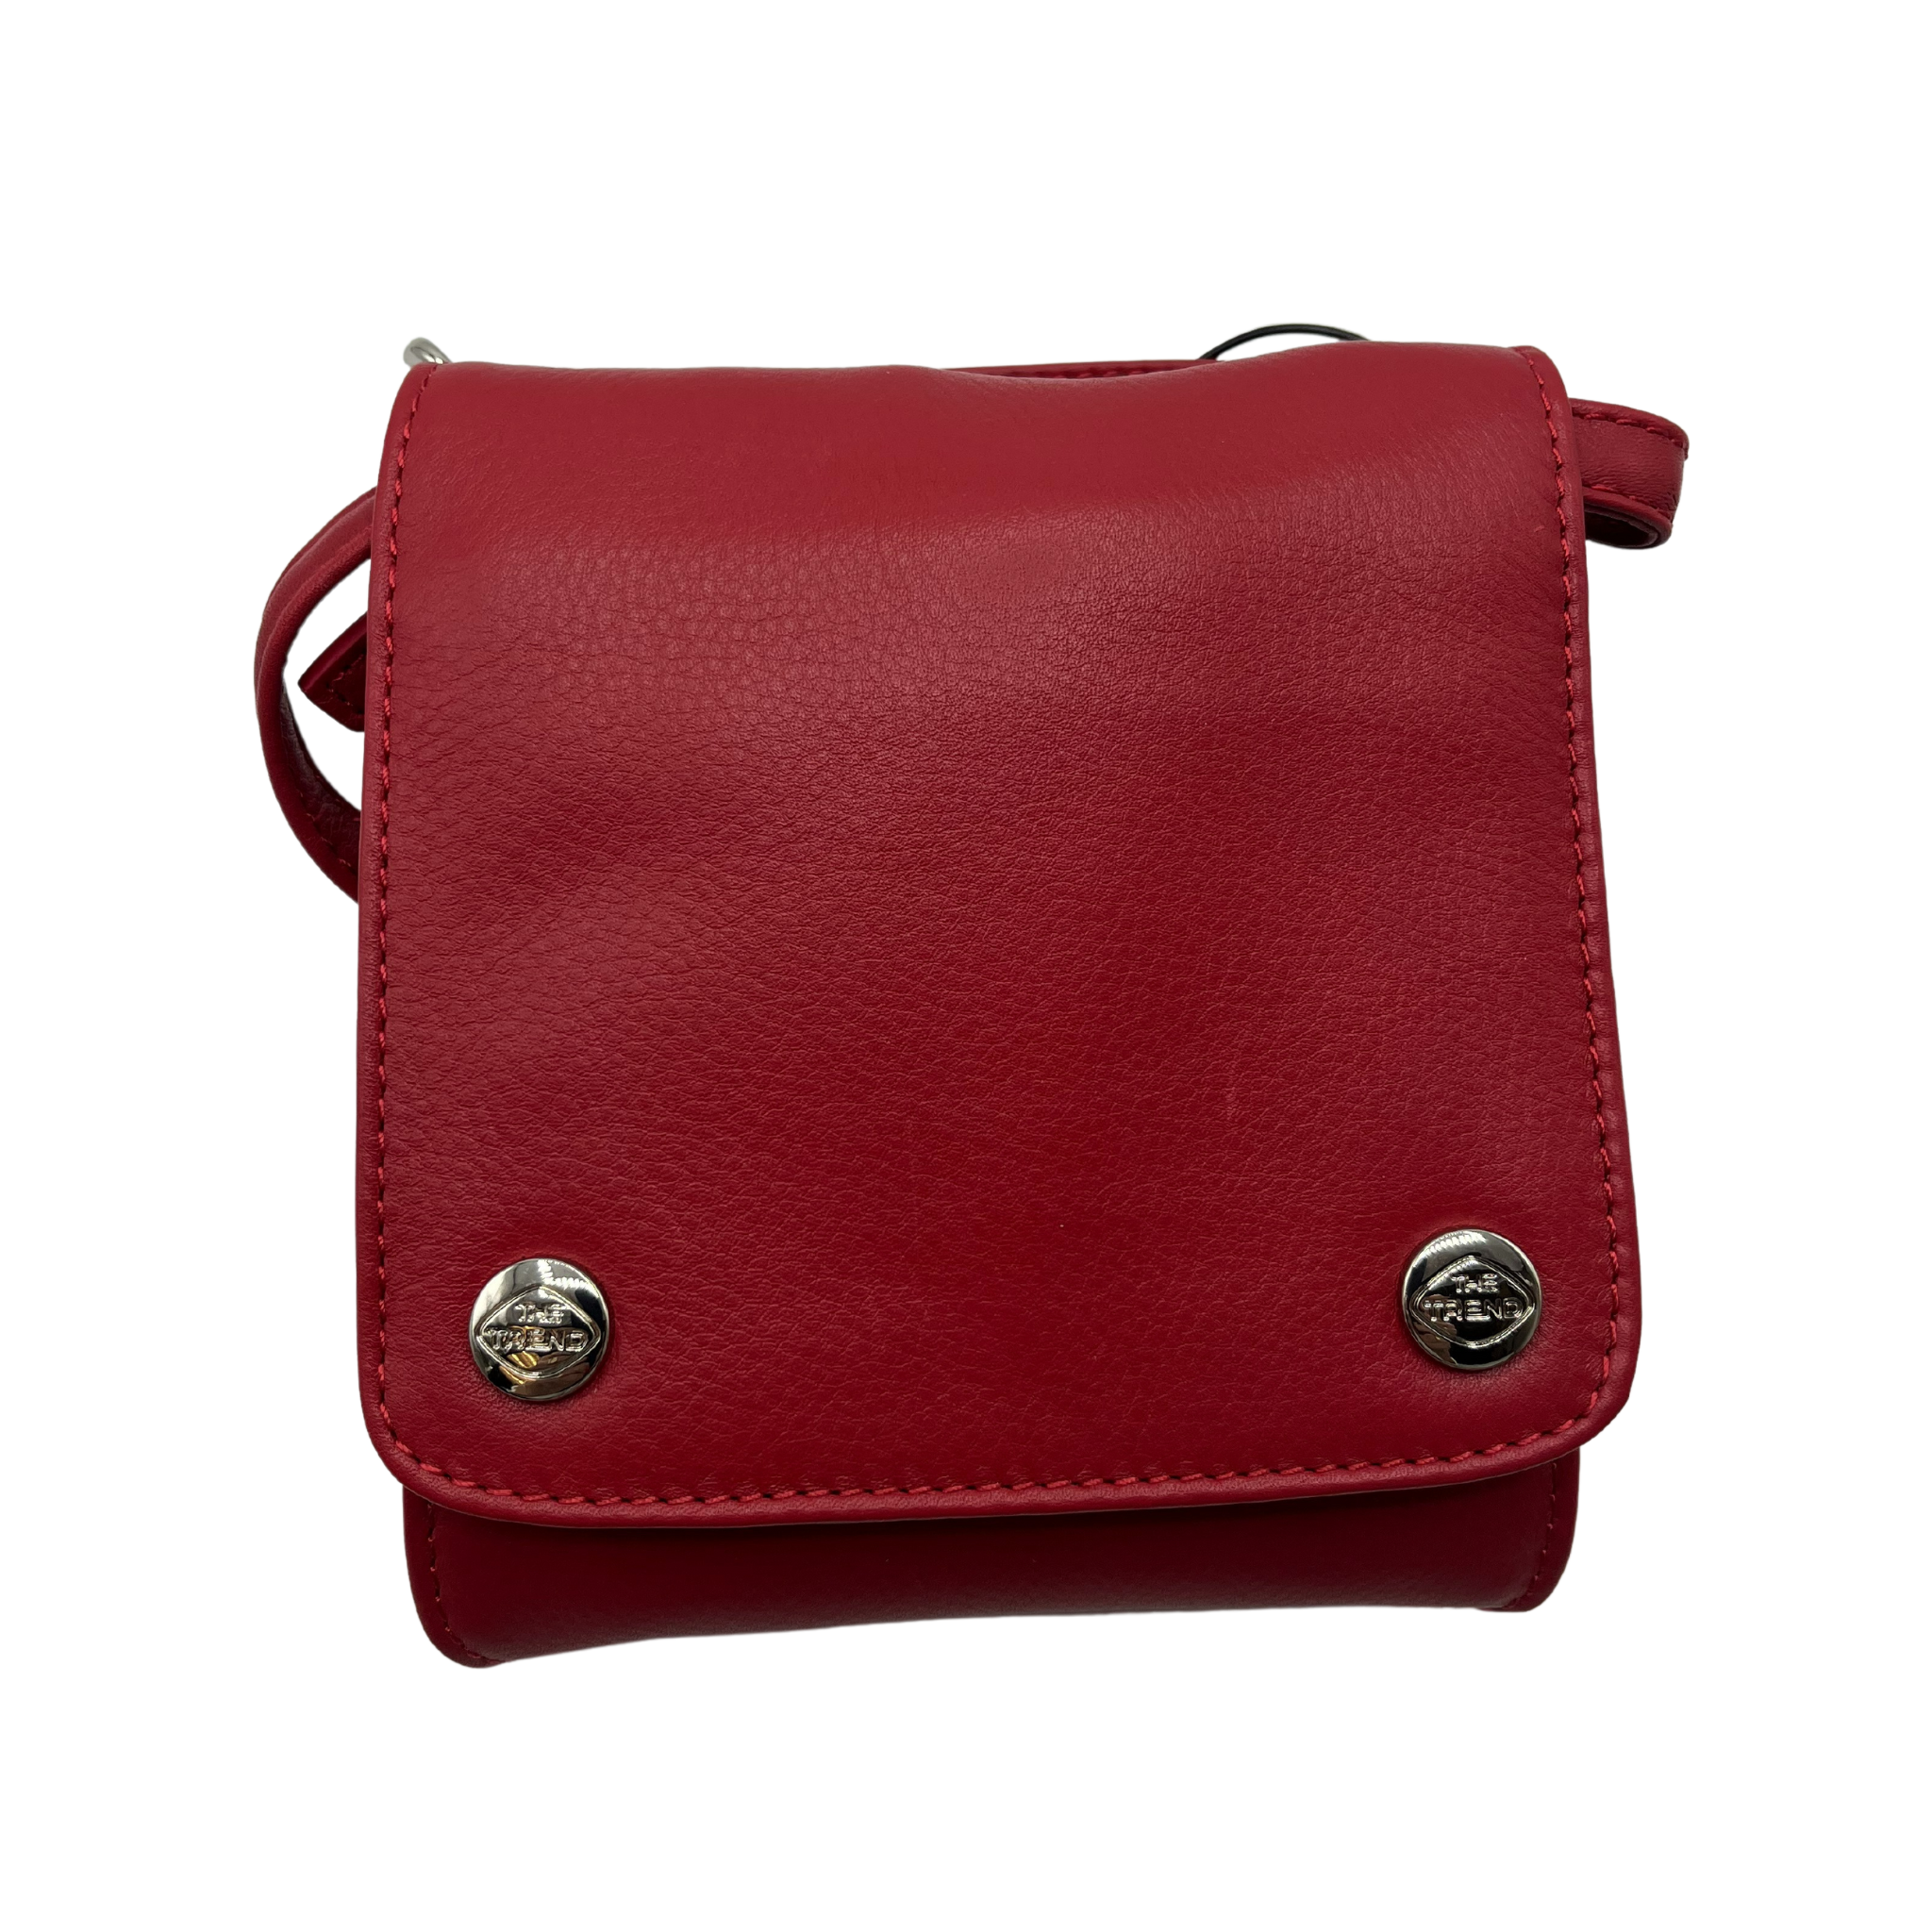 Valentina Bag - Made in Italy leather bags